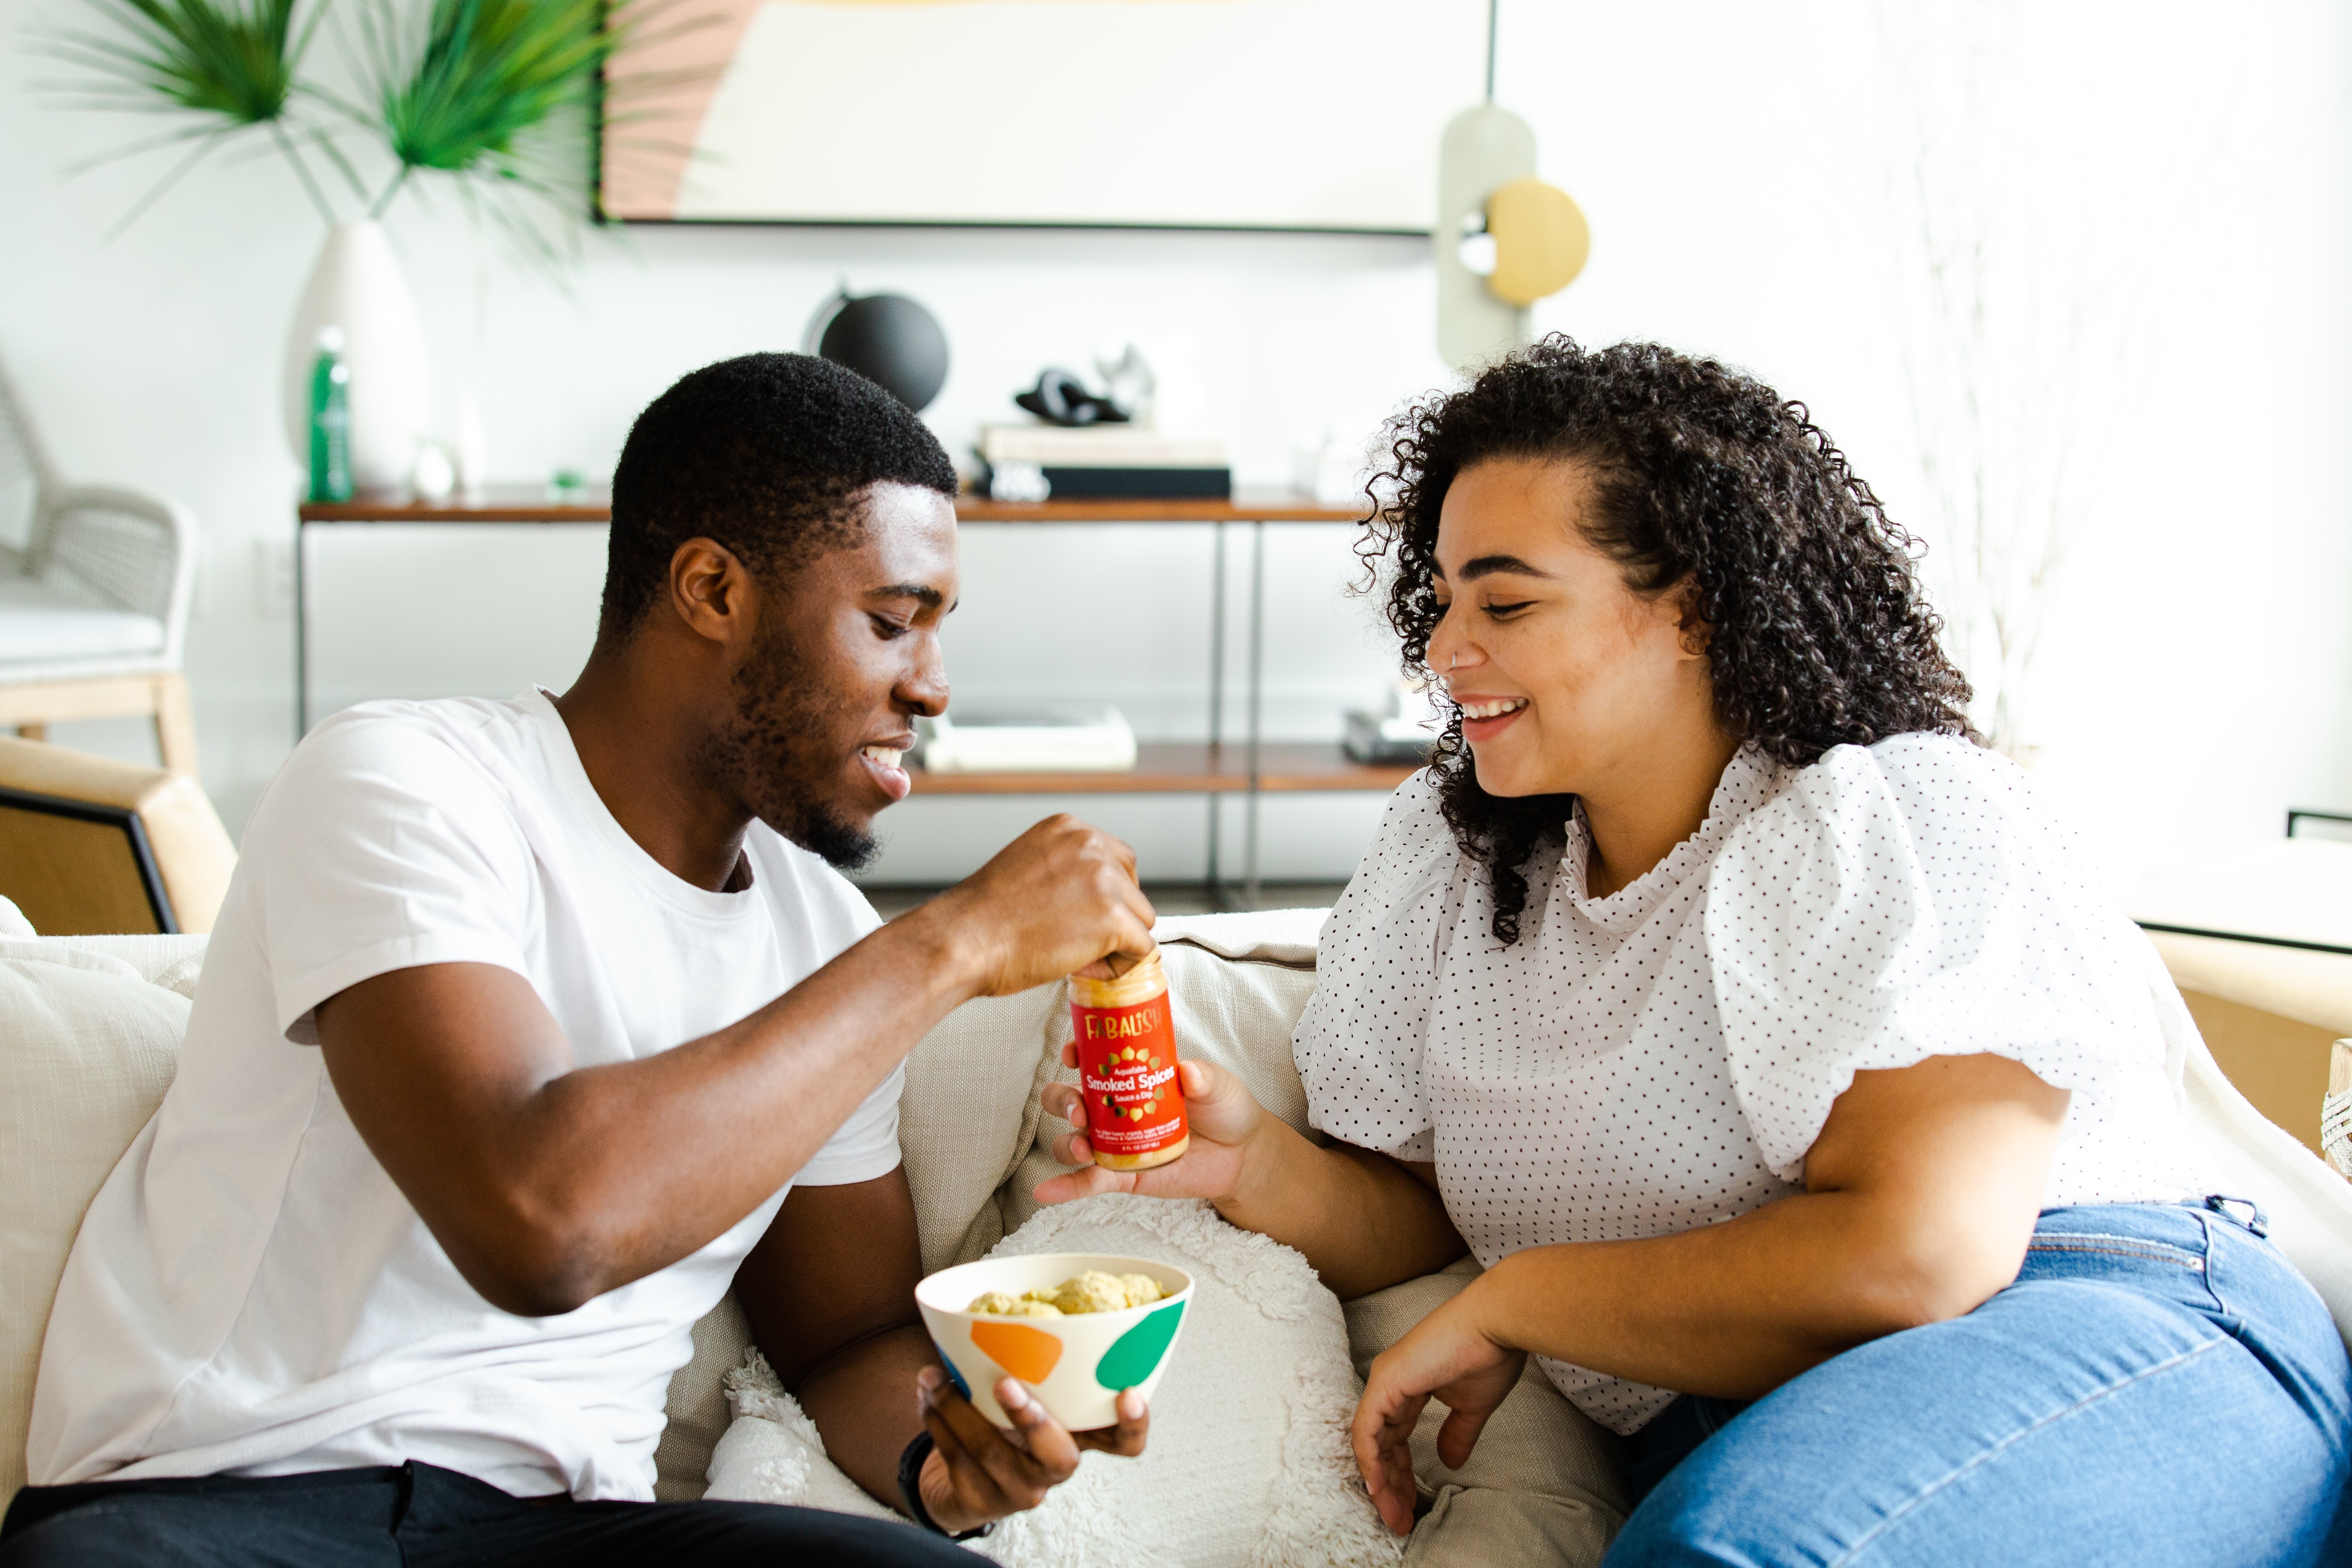 Image of two attractive ethnically diverse man and woman with white t-shirts are sharing snacks on top of a white couch in a sunny living room.